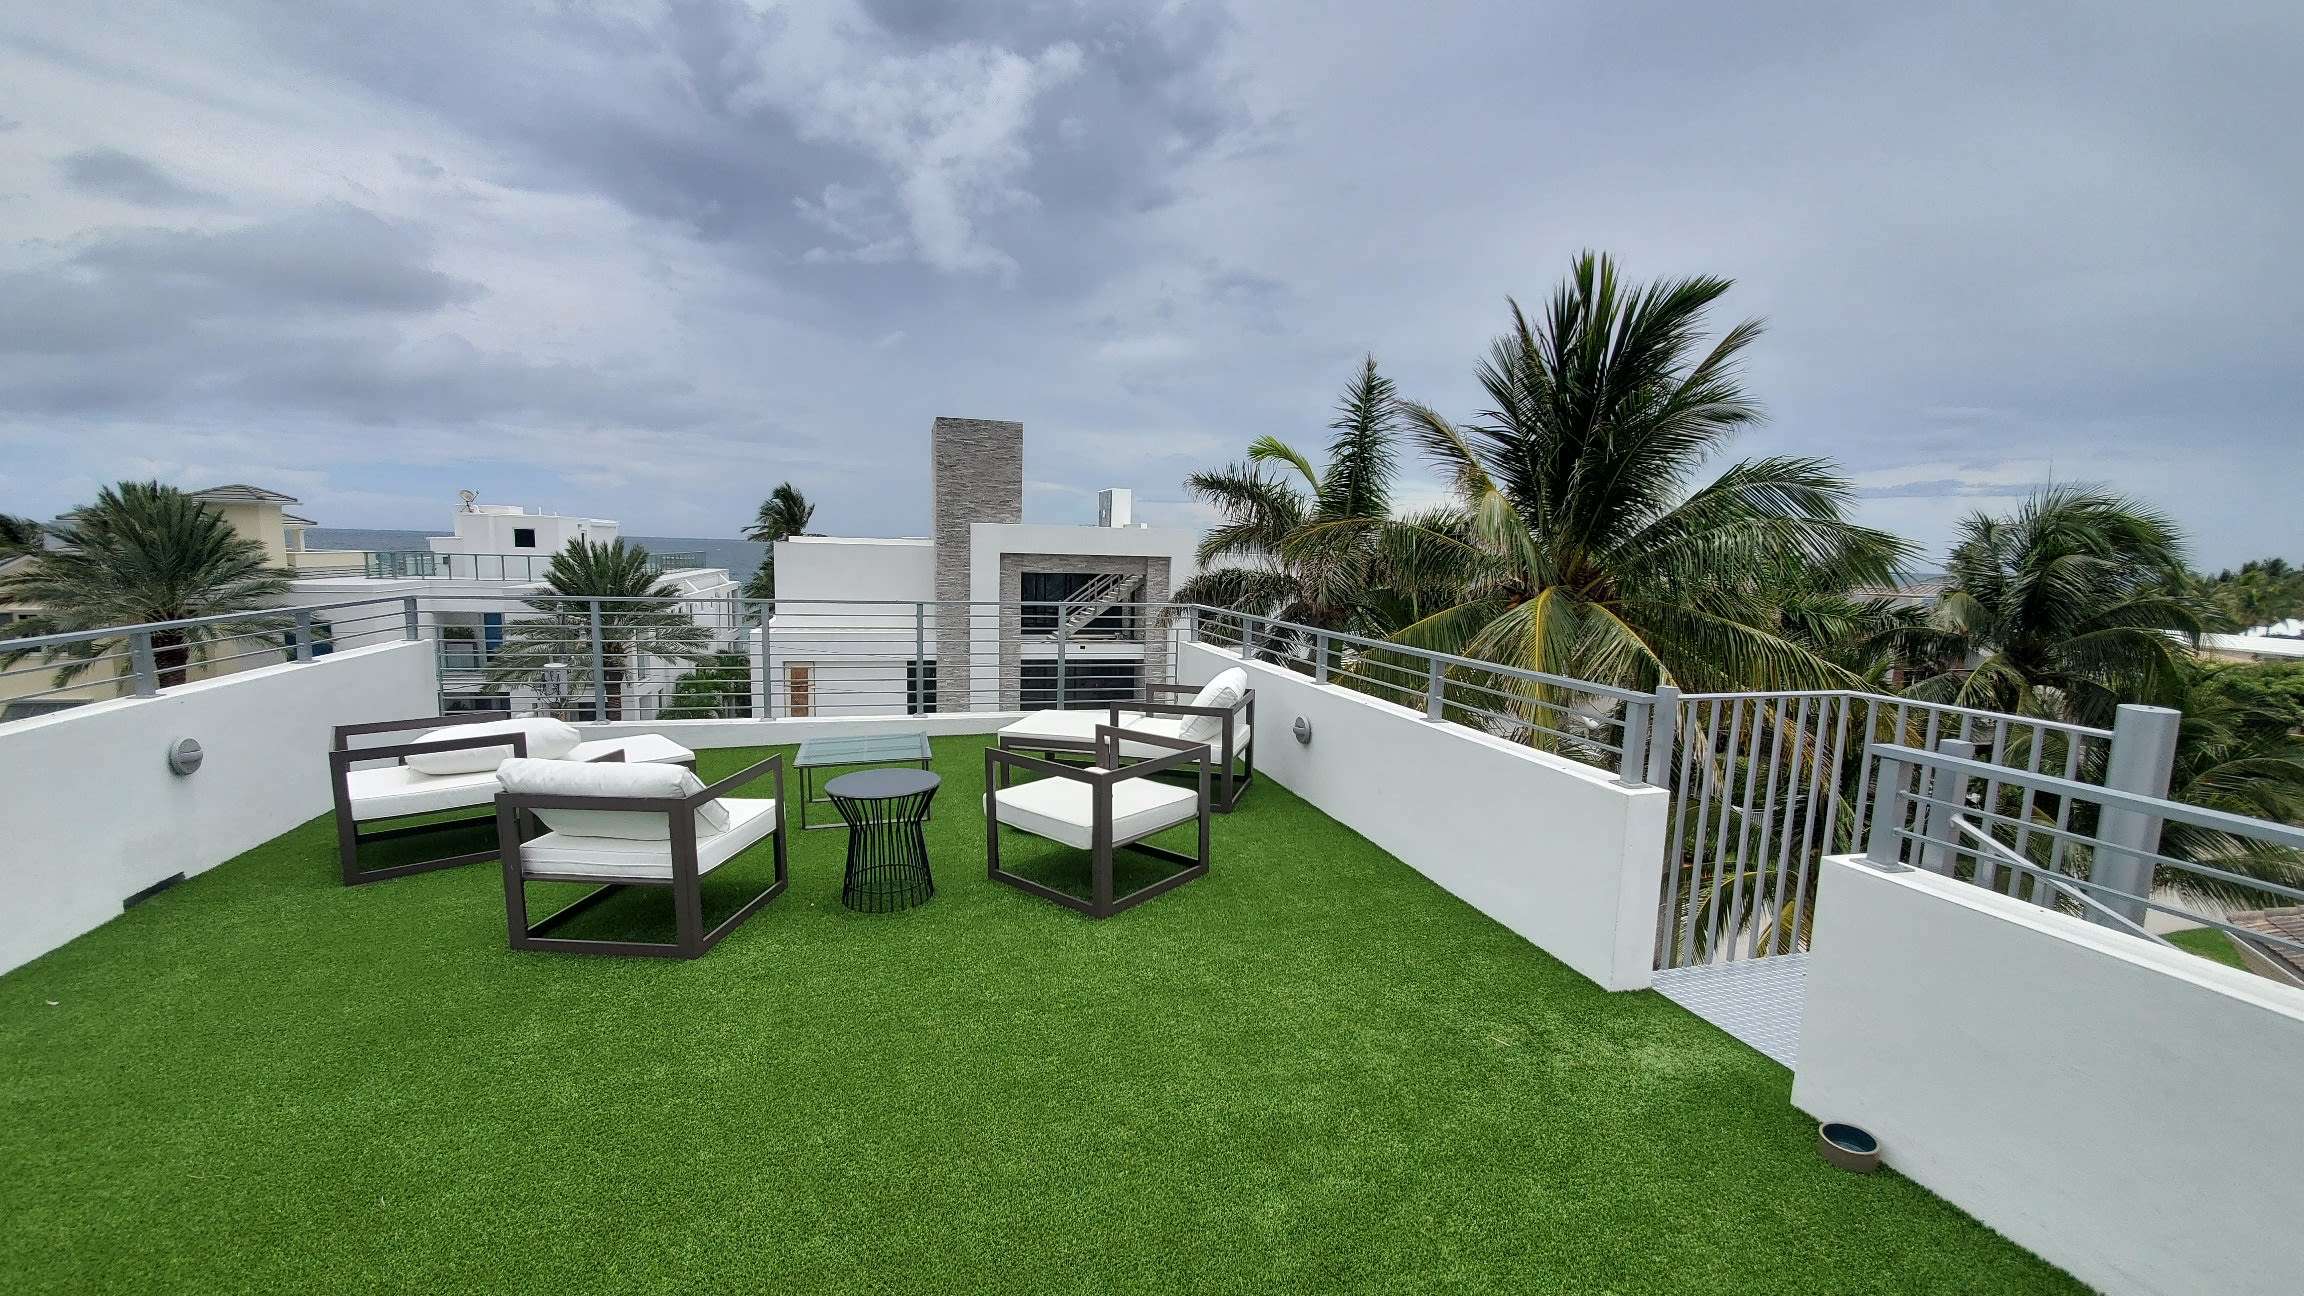 Rooftop patio with artificial grass flooring, featuring modern outdoor furniture with a sofa and chairs, bordered by a white railing with tropical palm trees and a view of overcast skies in the background.